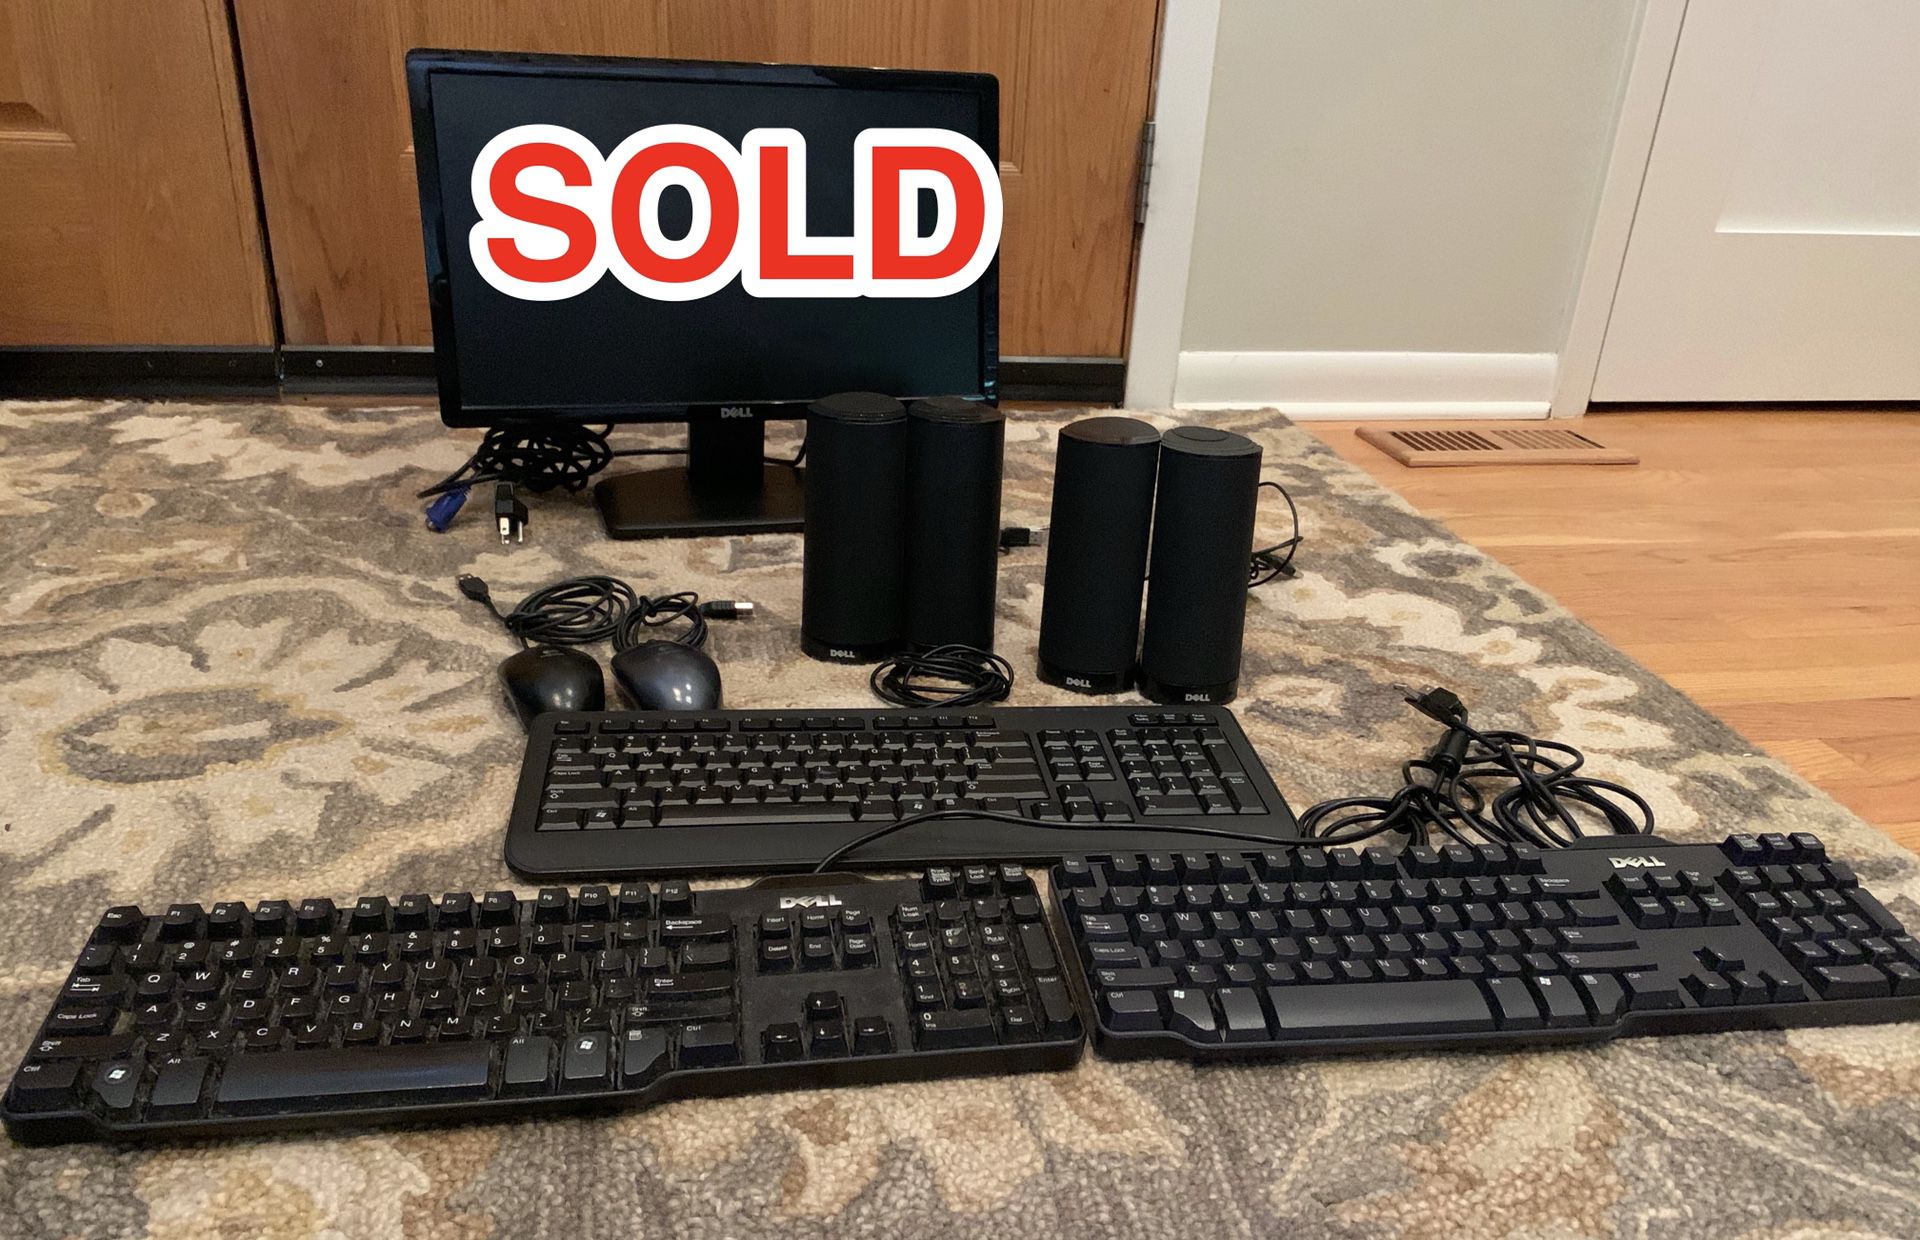 Misc computer items - 2 sets Dell external speakers, 3 keyboards, 2 mice